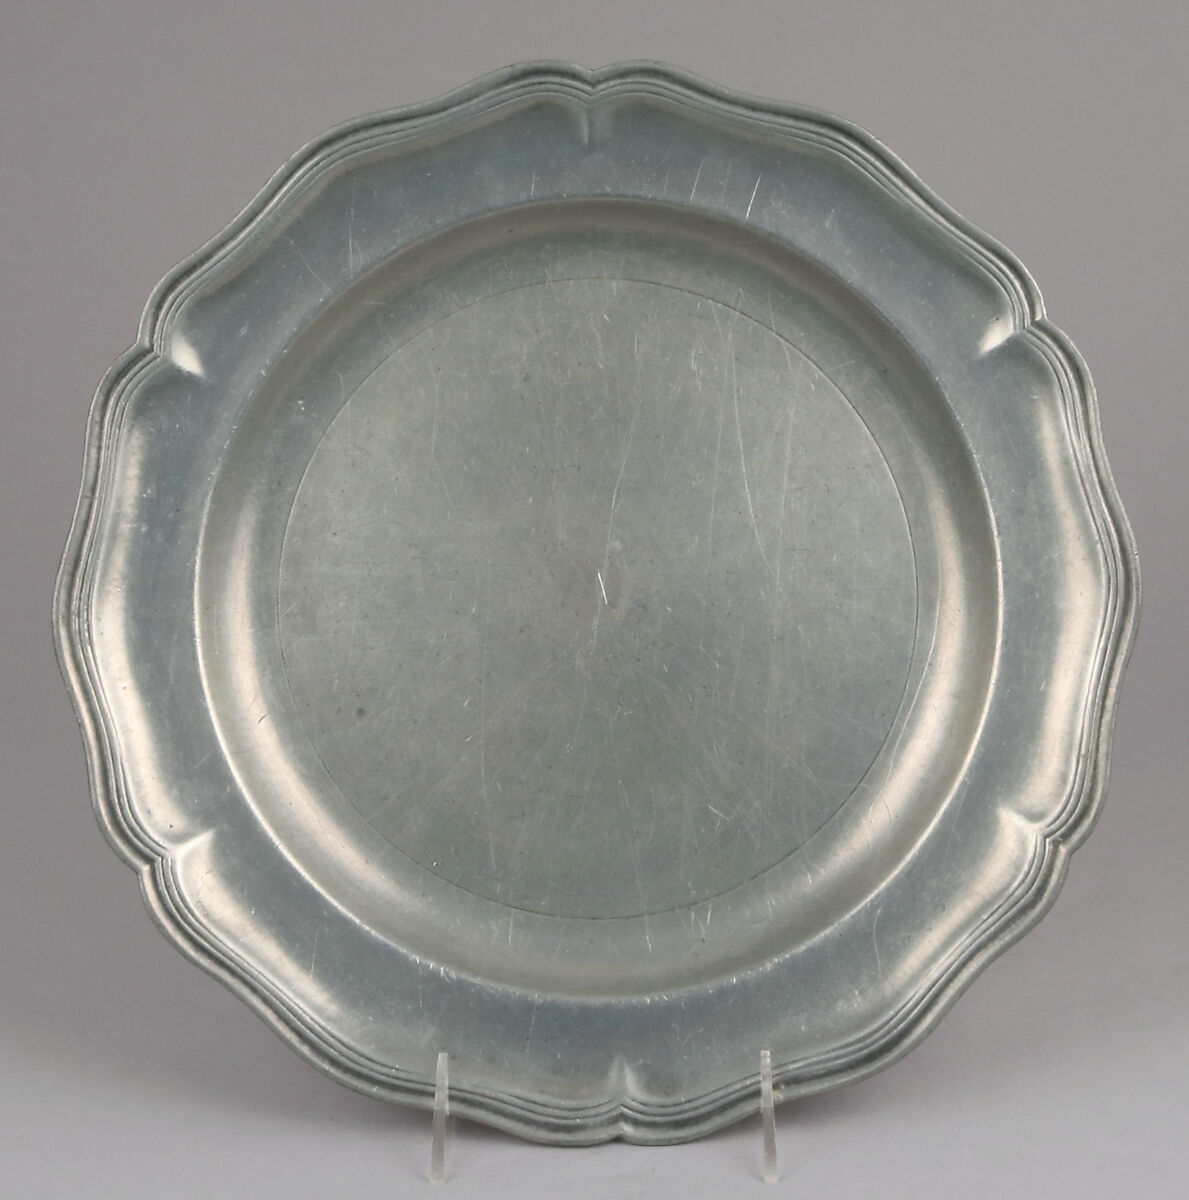 Dish, Jean Louis Peuty (French, born 1784, master 1818), Pewter, French, Béthune 